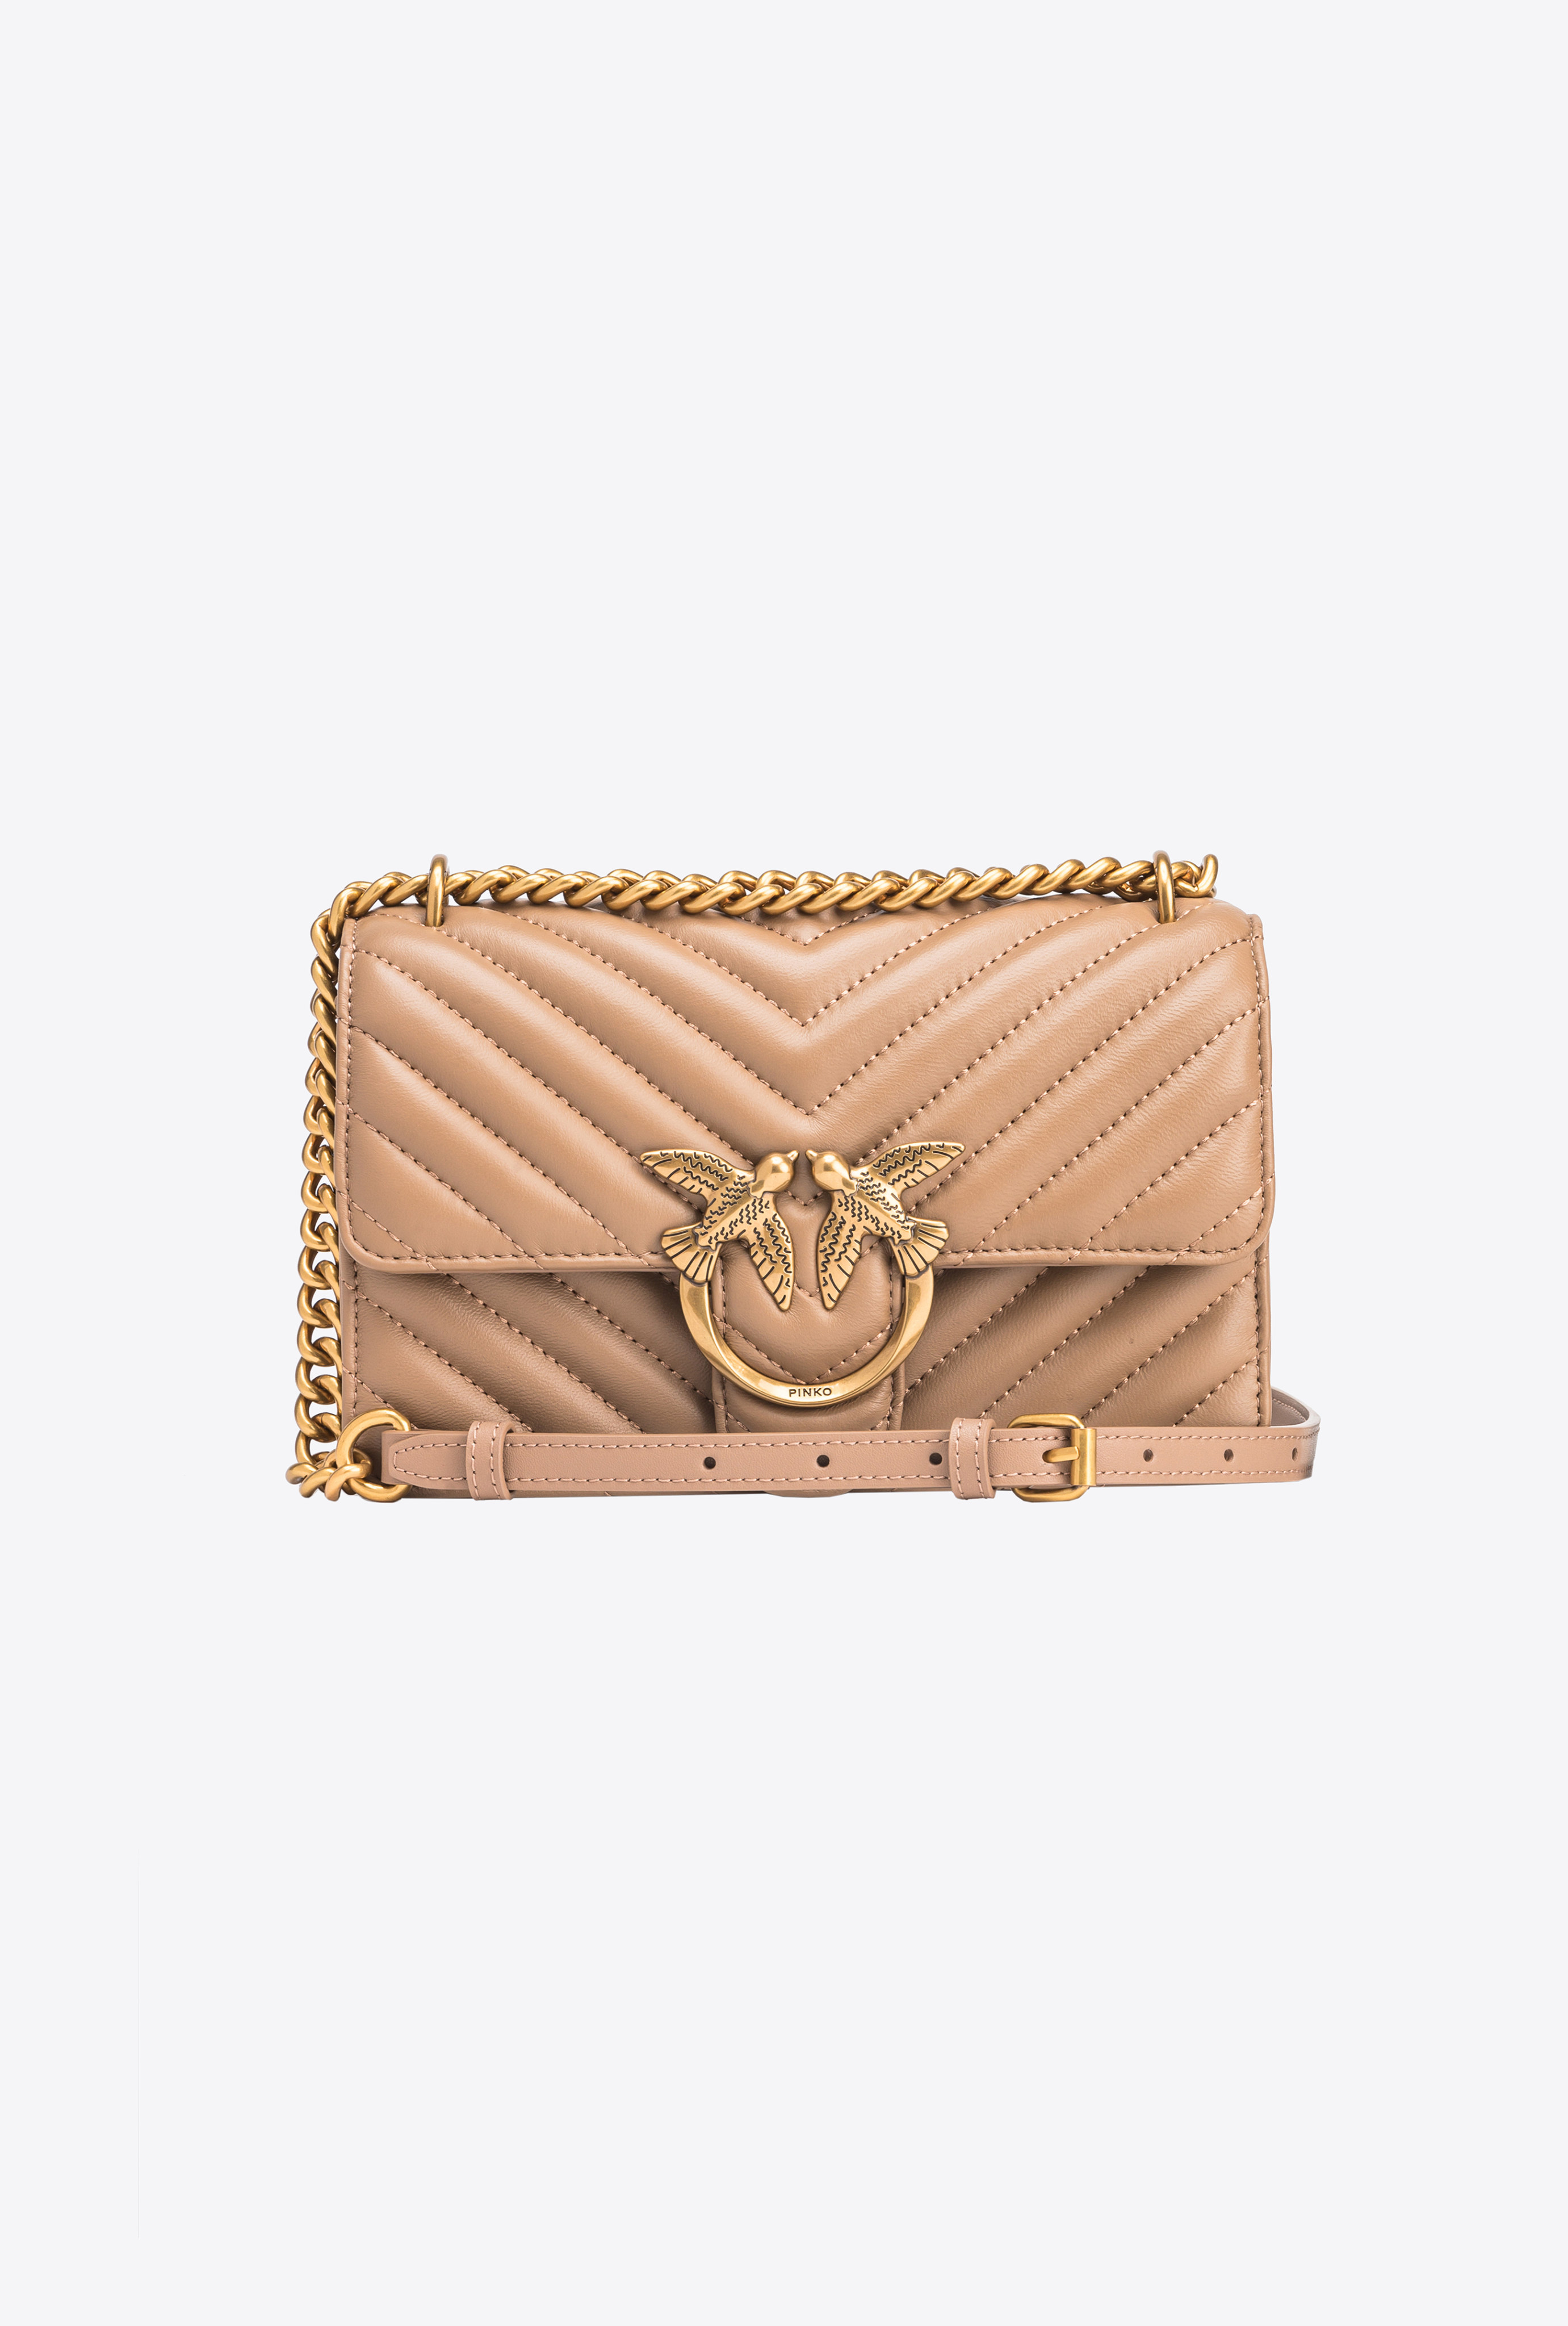 Pinko Mini Love Bag One Chevron In Ginger Biscuit-antique Gold